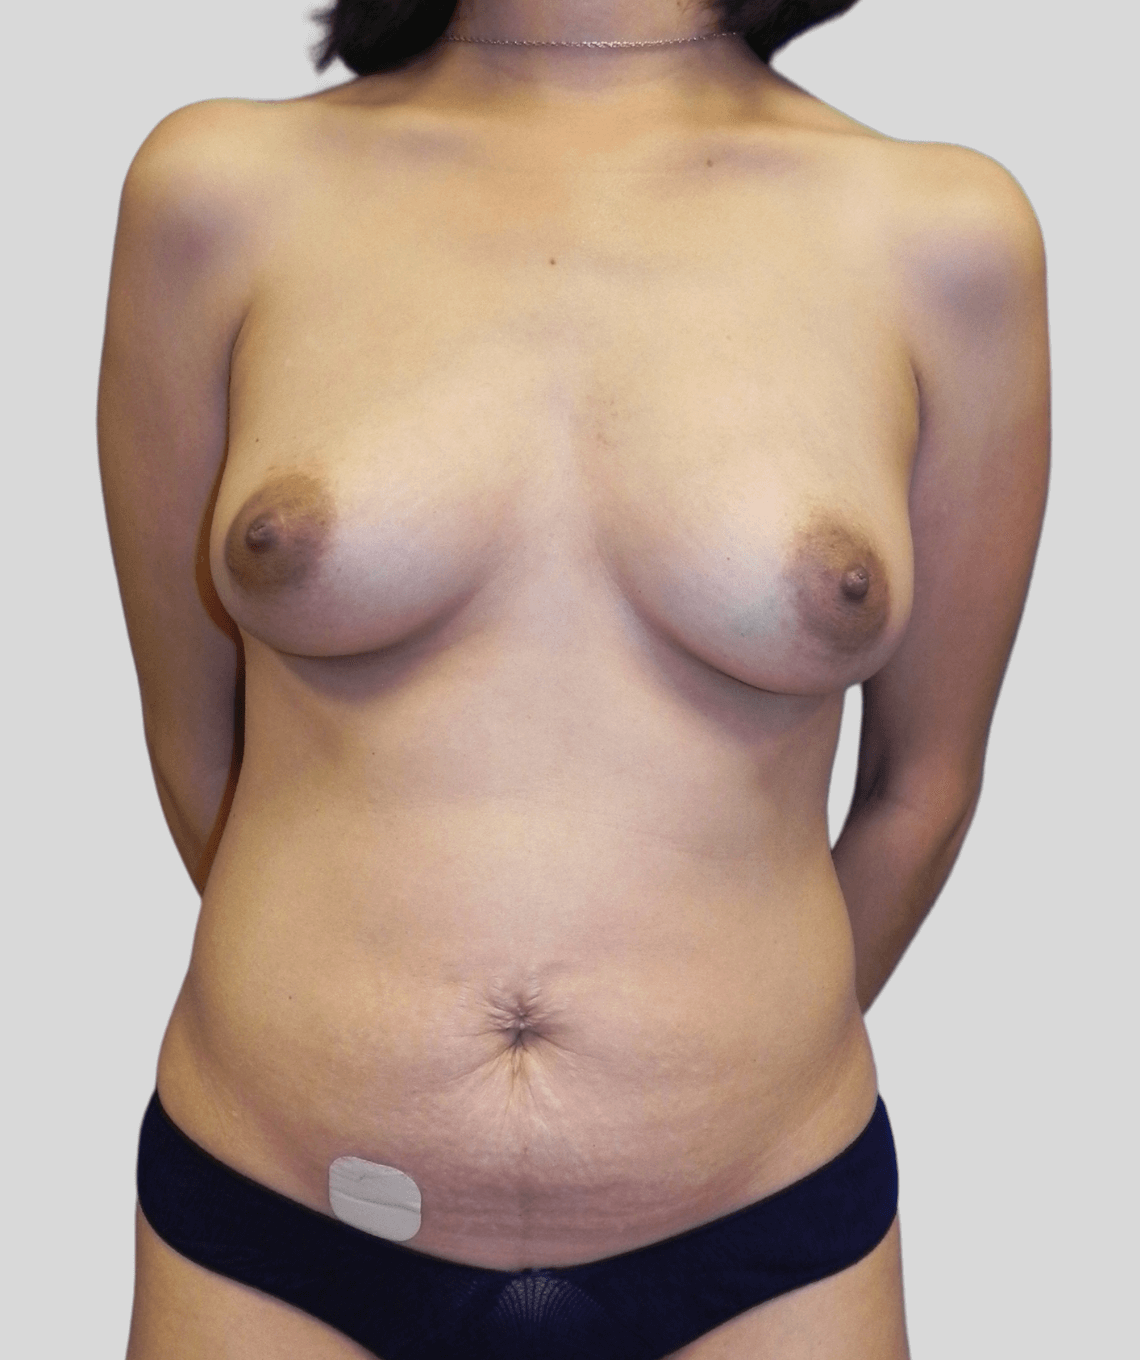 diep flap- before and after photos - before - prma plastic surgery - case 5